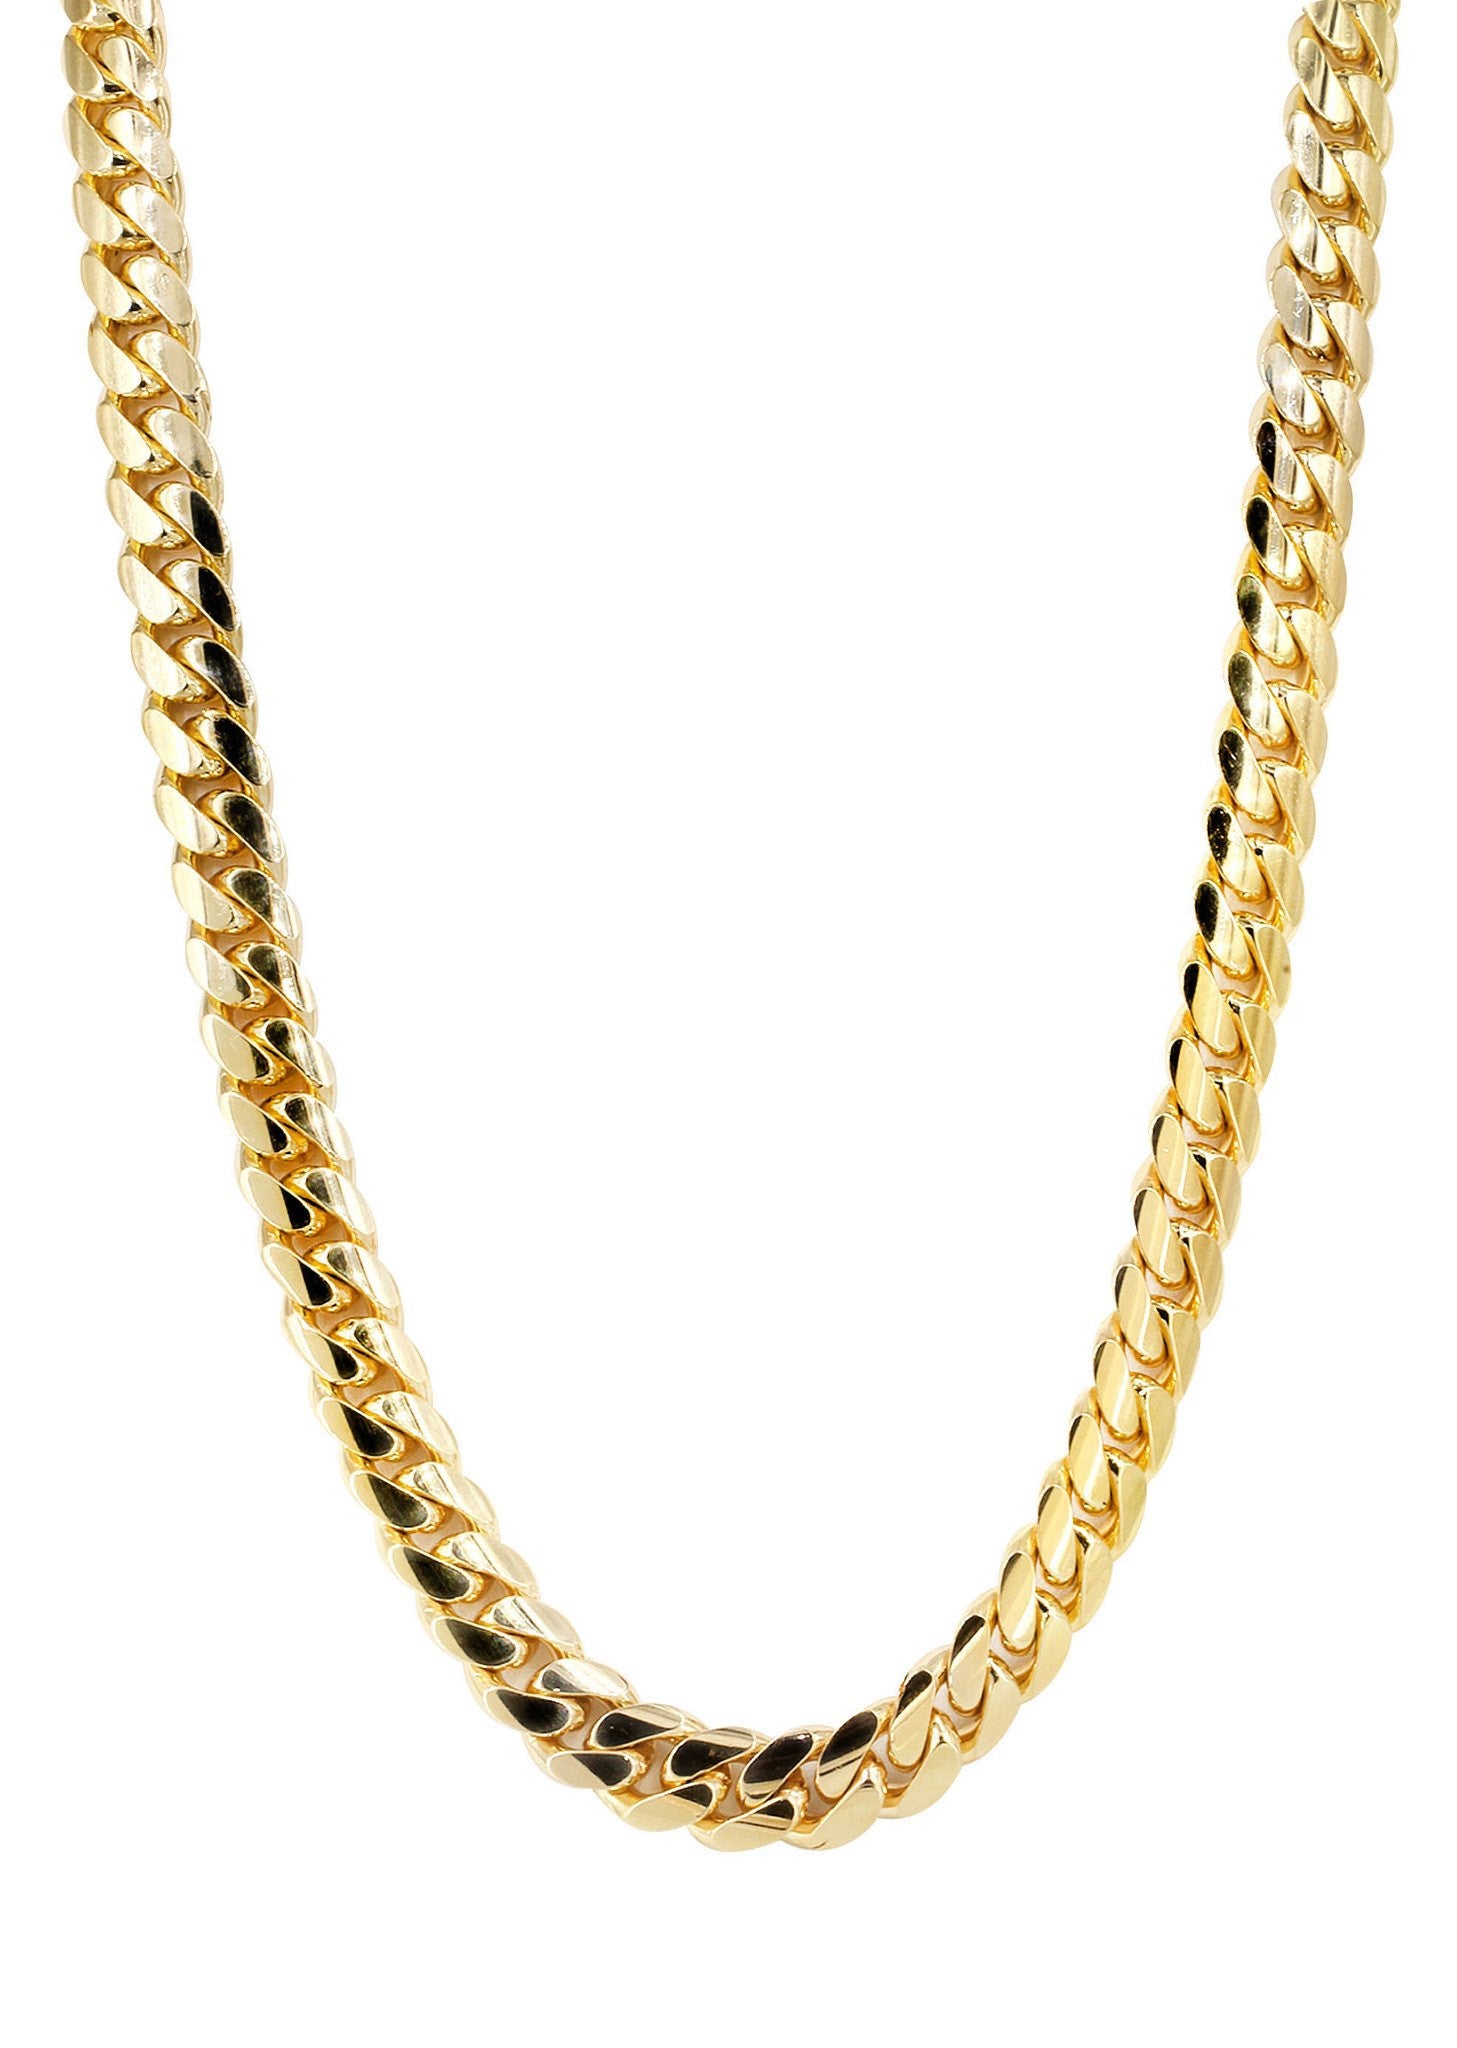 frost nyc cuban link chain